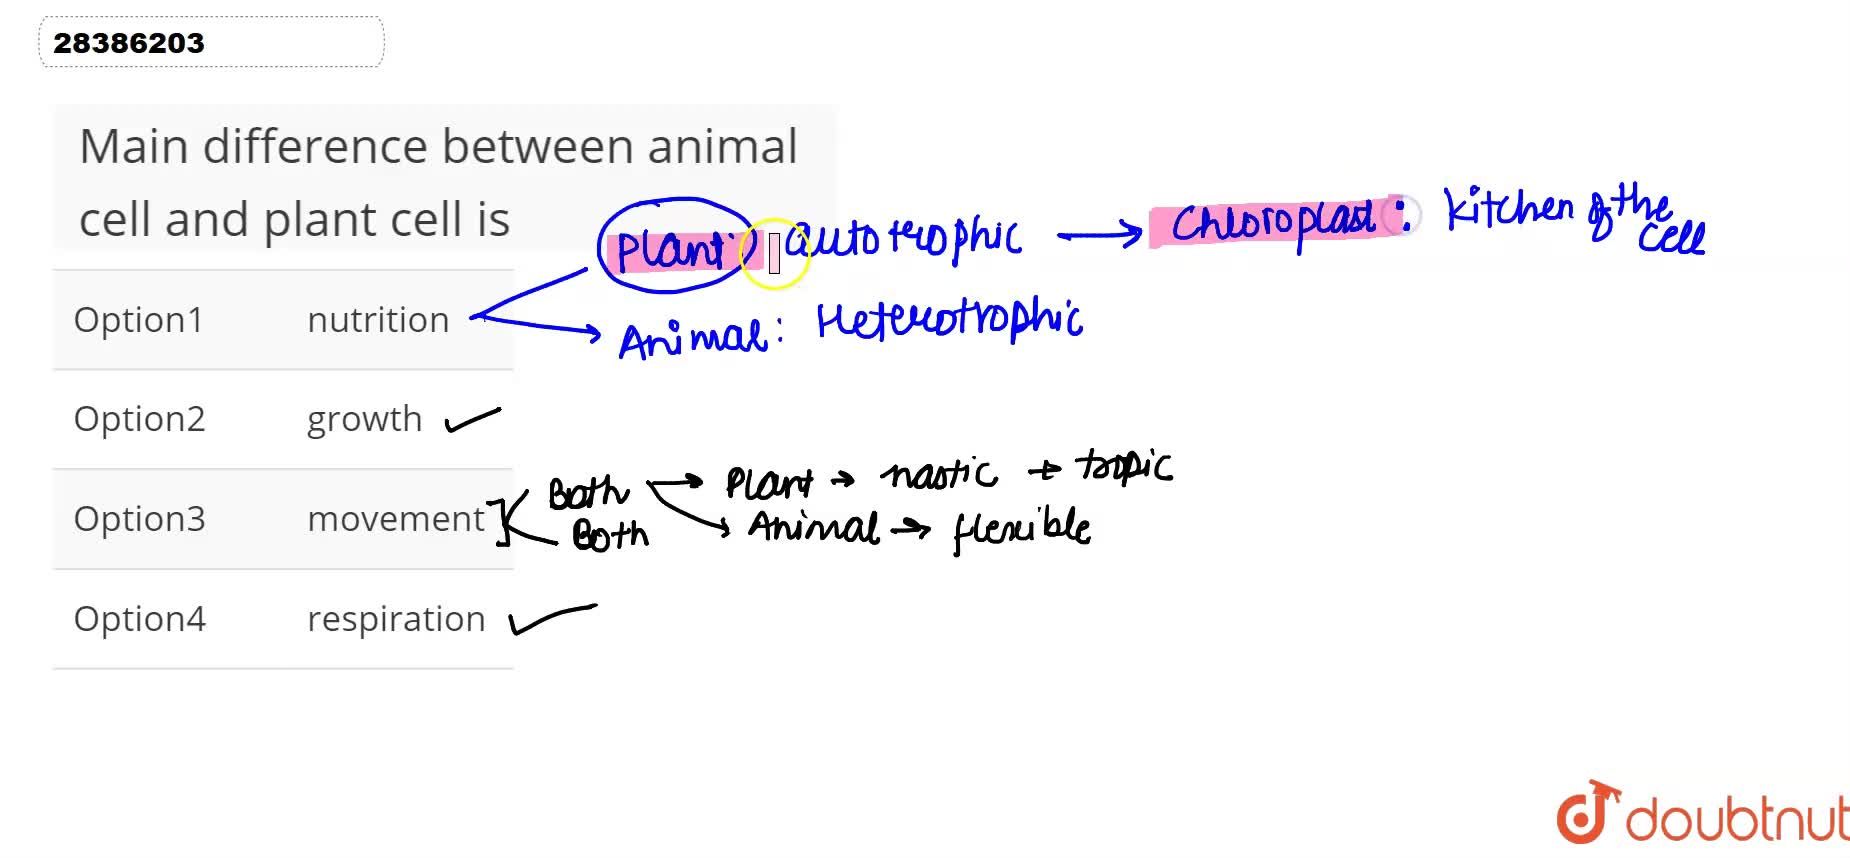 Main difference between animal cell and plant cell is